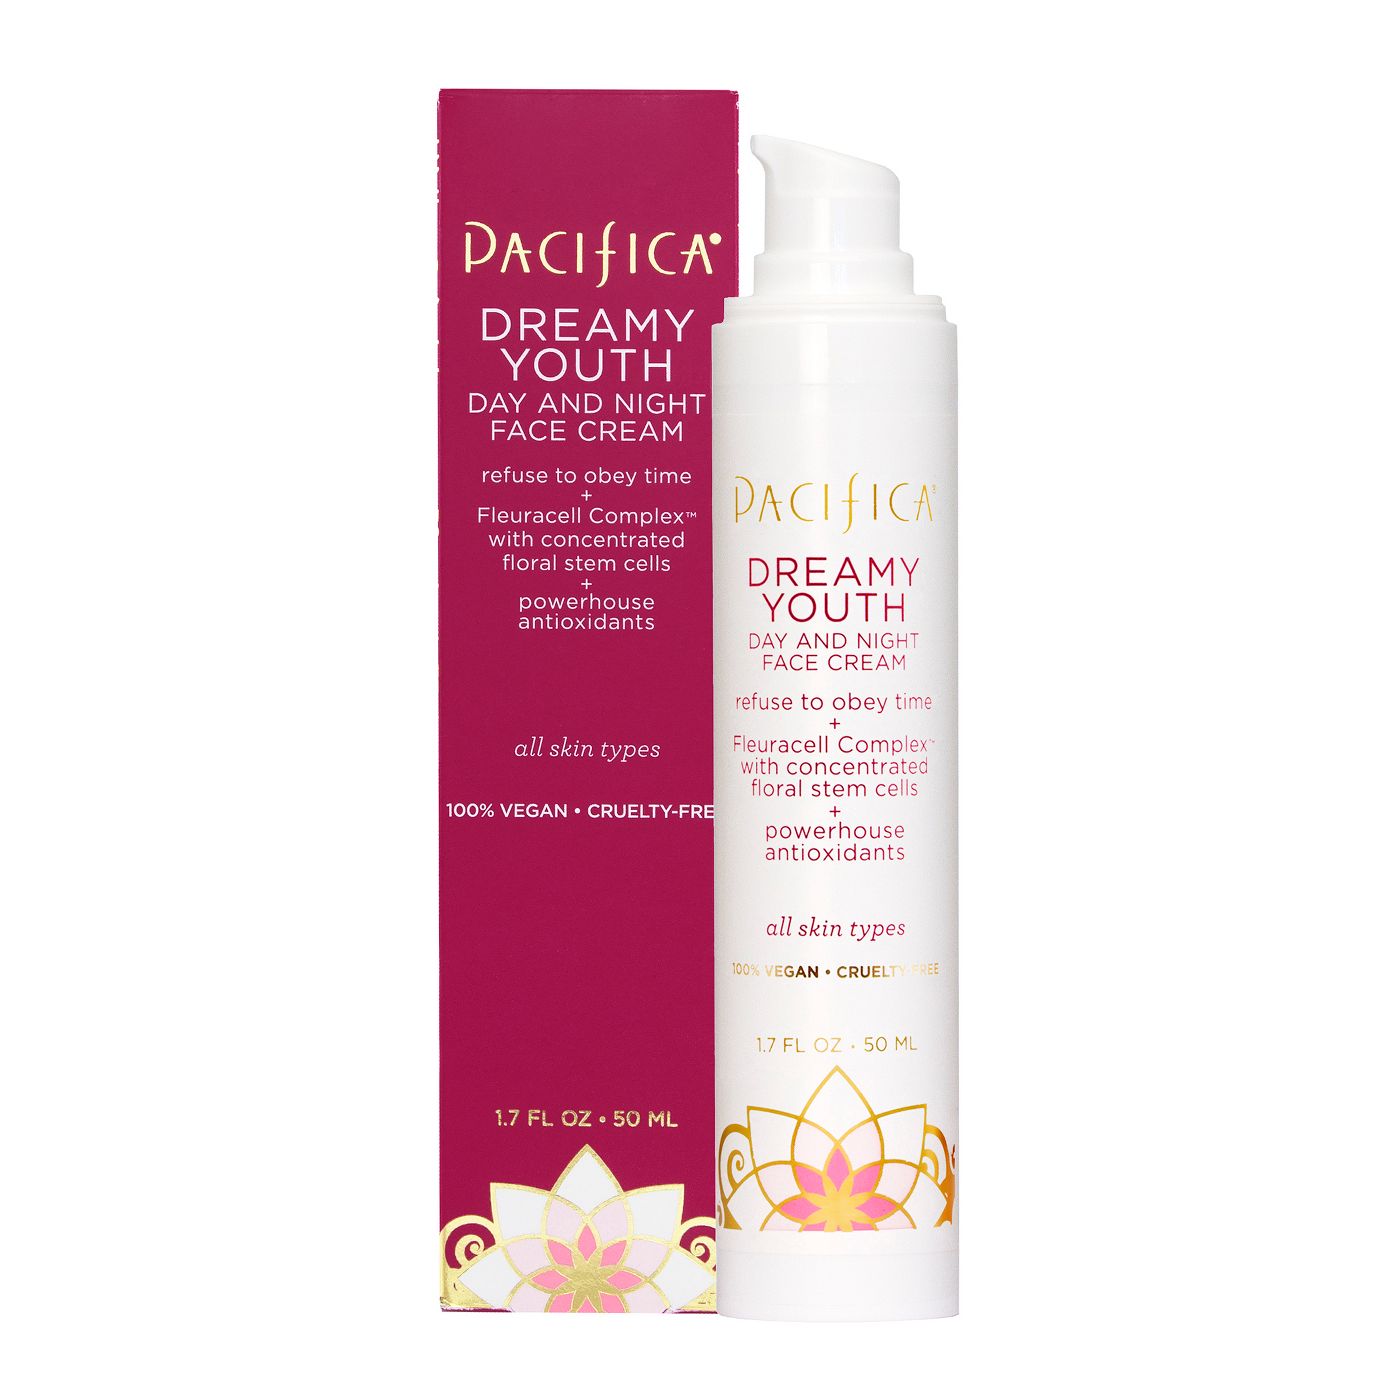 Pacifica Dreamy Youth Day & Night Face Cream